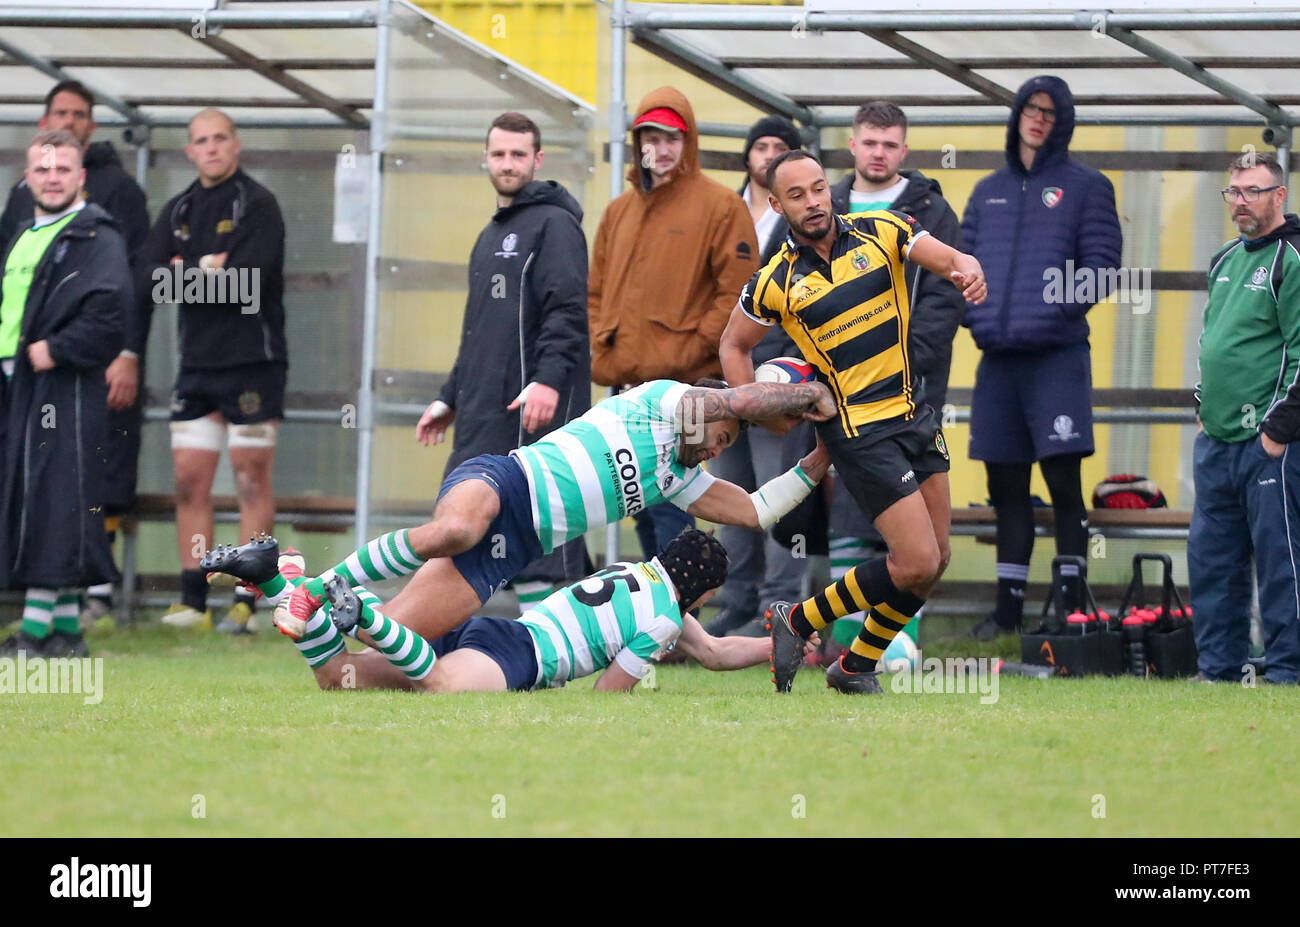 Leicester, England. Rugby Union, Hinckley rfc v South Leicester rfc.   Aaron Phillip makes a break for Hinckley during the RFU National League 2 North (NL2N) game played at the Leicester  Road Stadium.  © Phil Hutchinson / Alamy Live News Stock Photo